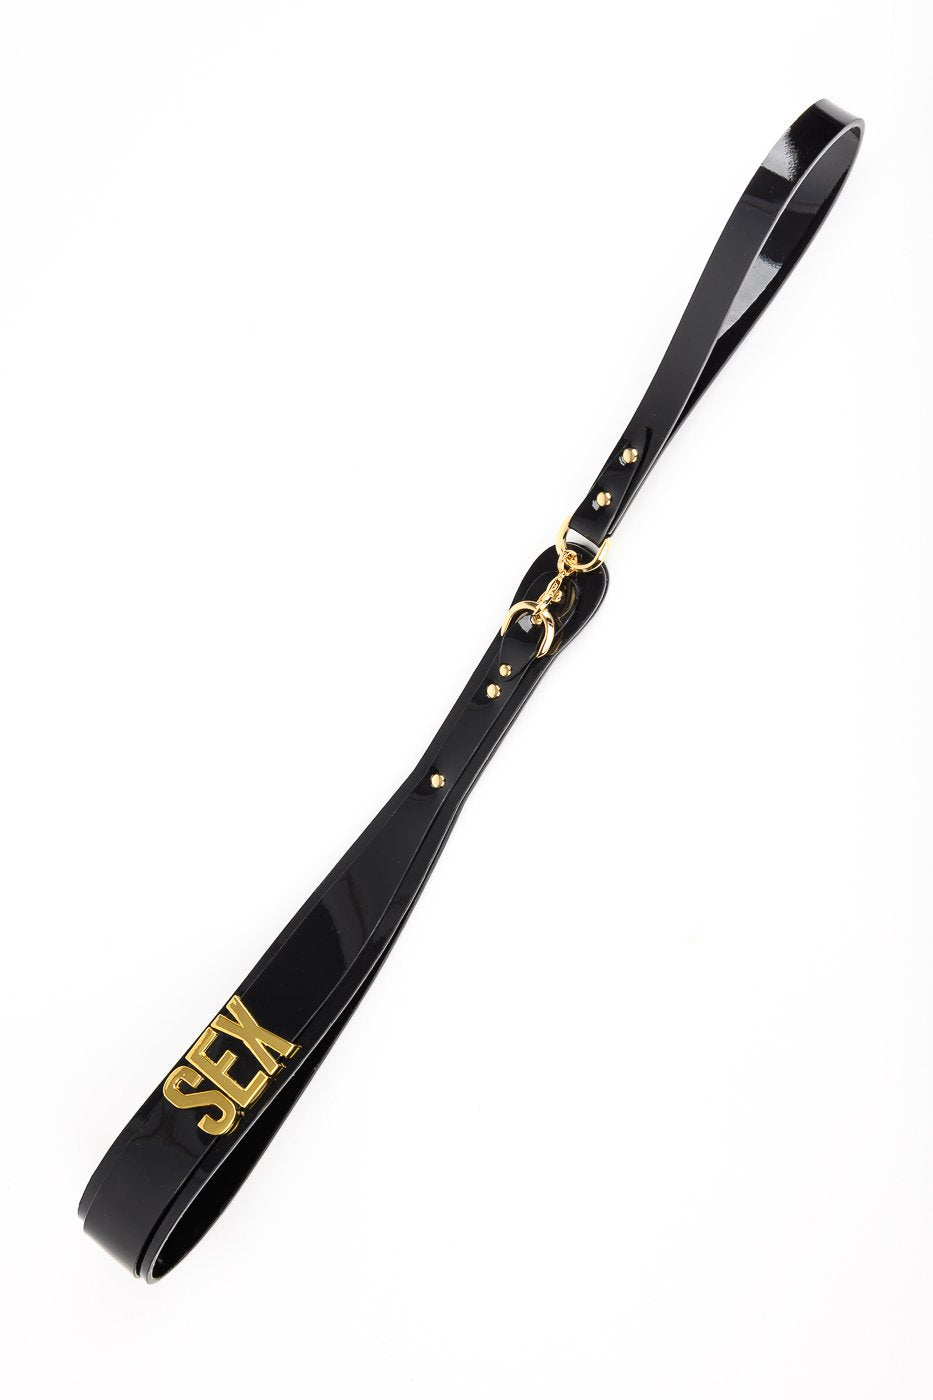 Sex Paddle in Black and Gold By Fraulein Kink